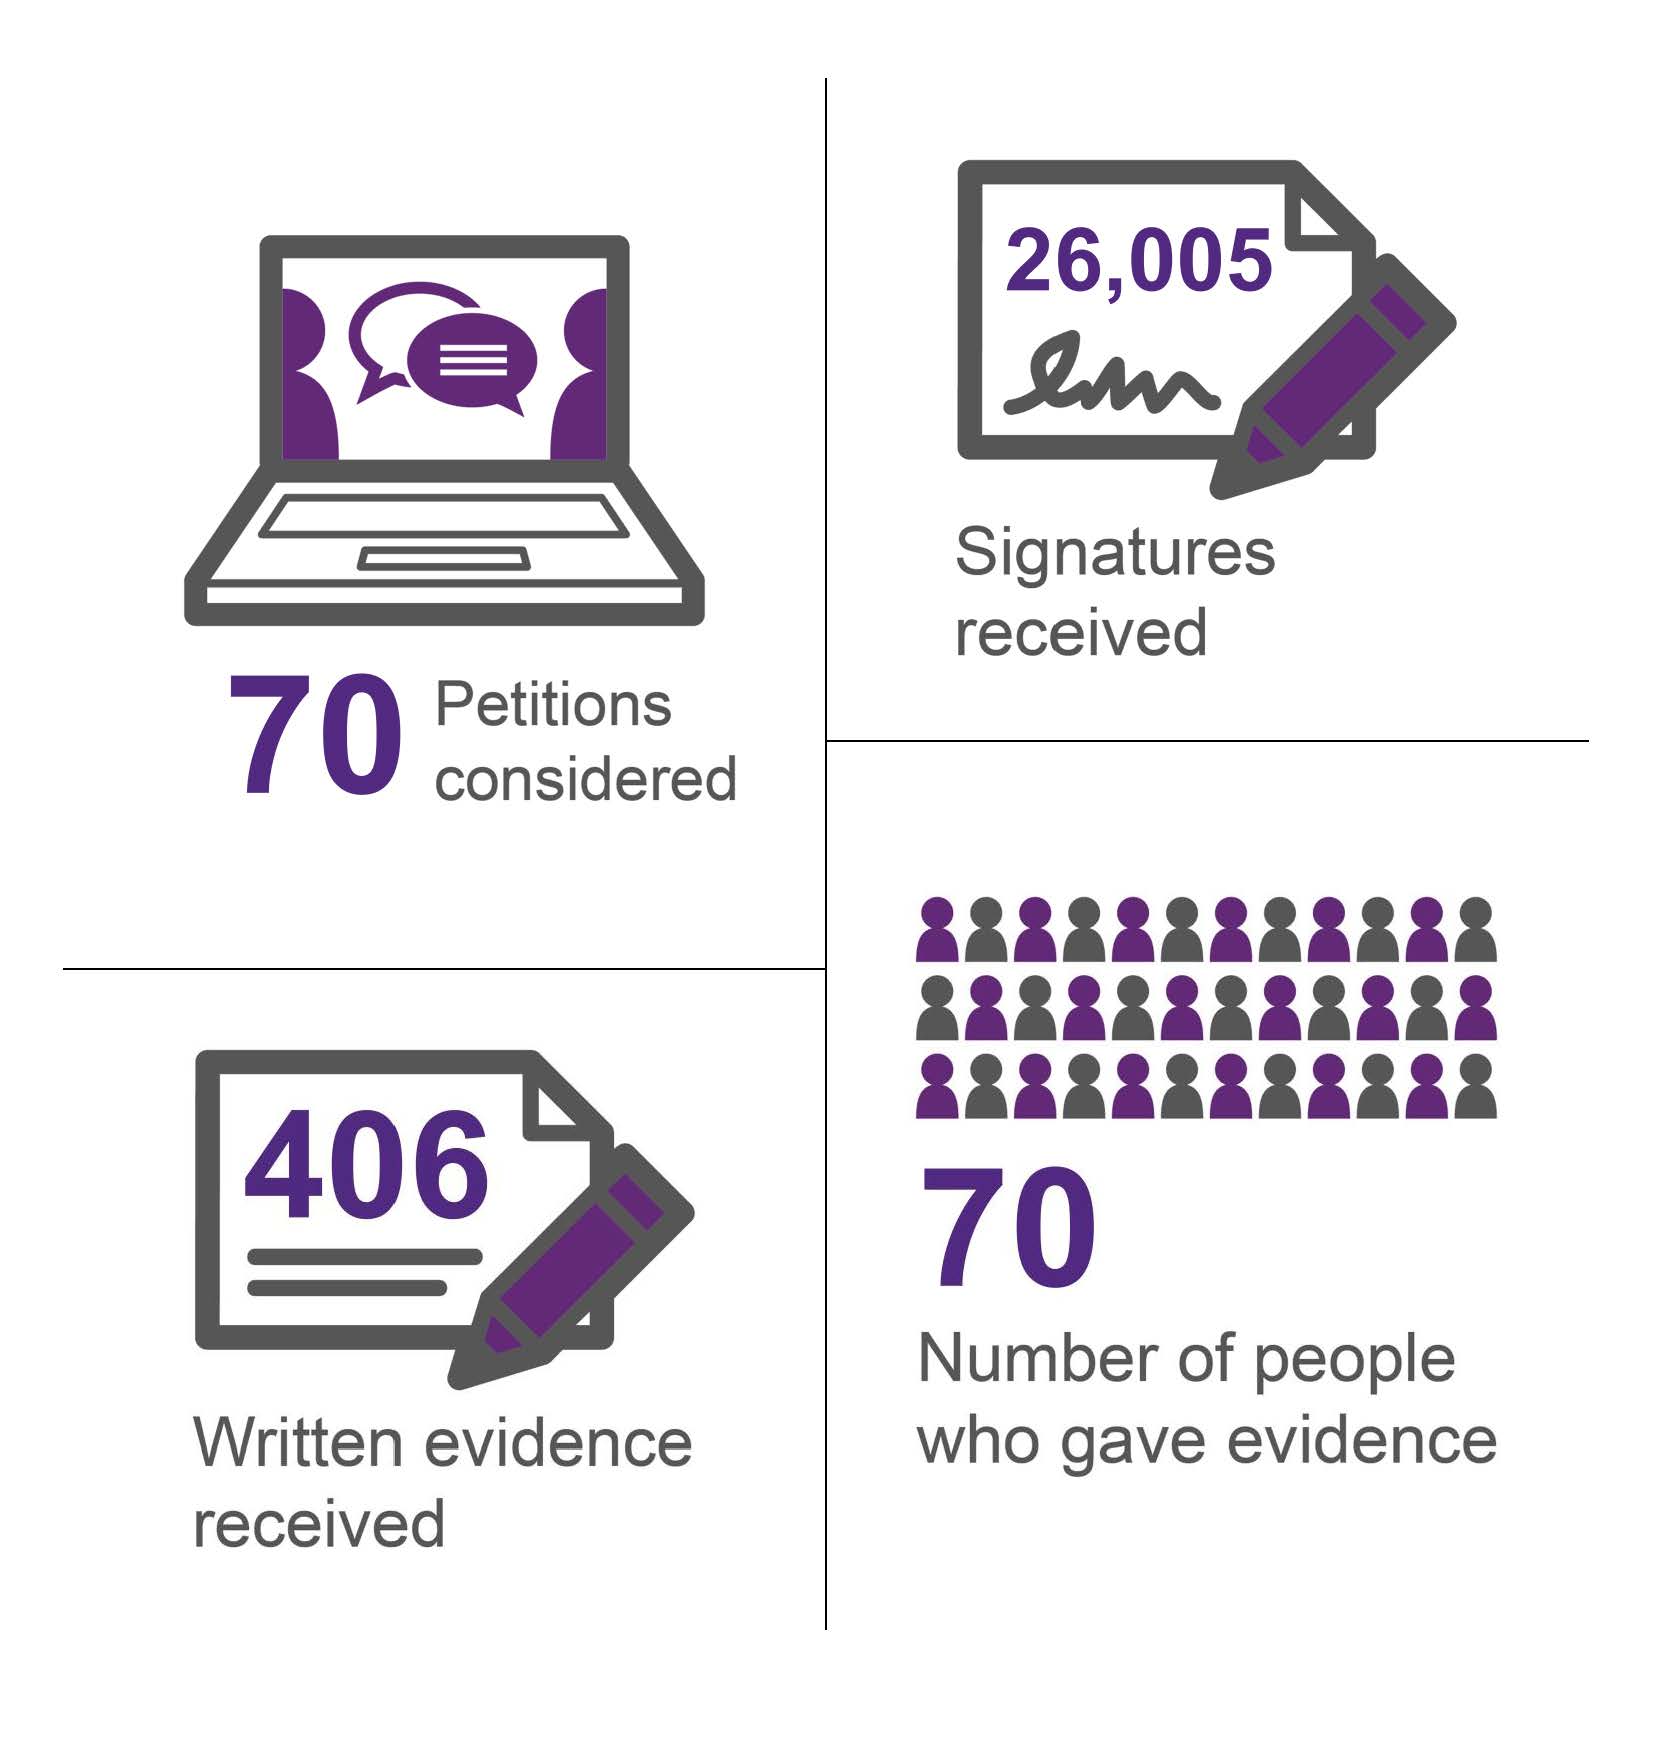 Picture showing the number of petitions lodged, the number of signatures received, the number of written submissions and the number of people giving evidence.